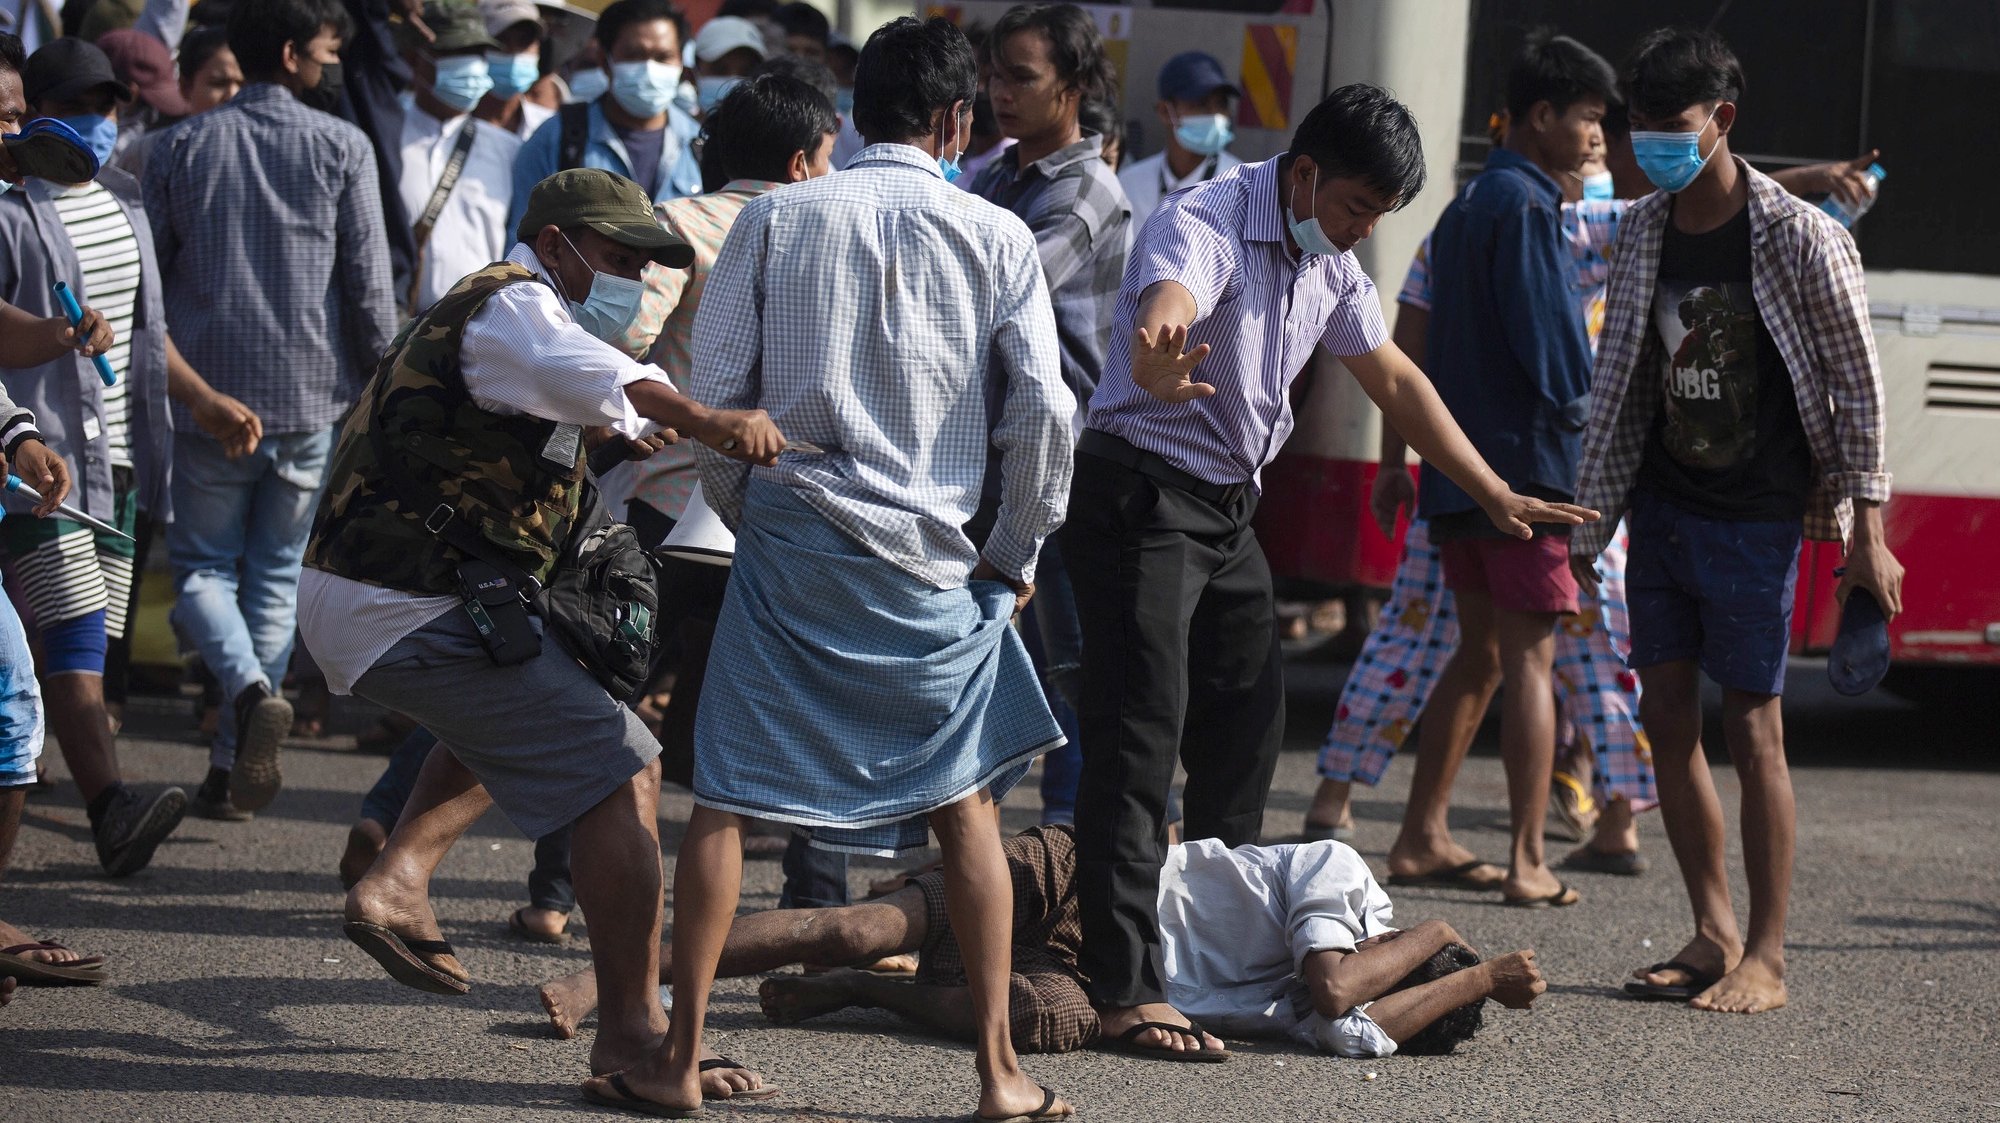 epa09035142 A resident falls to the ground as pro-military supporters attack residents with sling shots and projectiles near the central railway station in Yangon, Myanmar, 25 February 2021. Residents were banging pots and pans before they were attacked by pro-military supporters. Anti-coup demonstrations continued amid regional diplomatic attempts to reach a resolution to weeks of unrest caused by the military coup.  EPA/STR